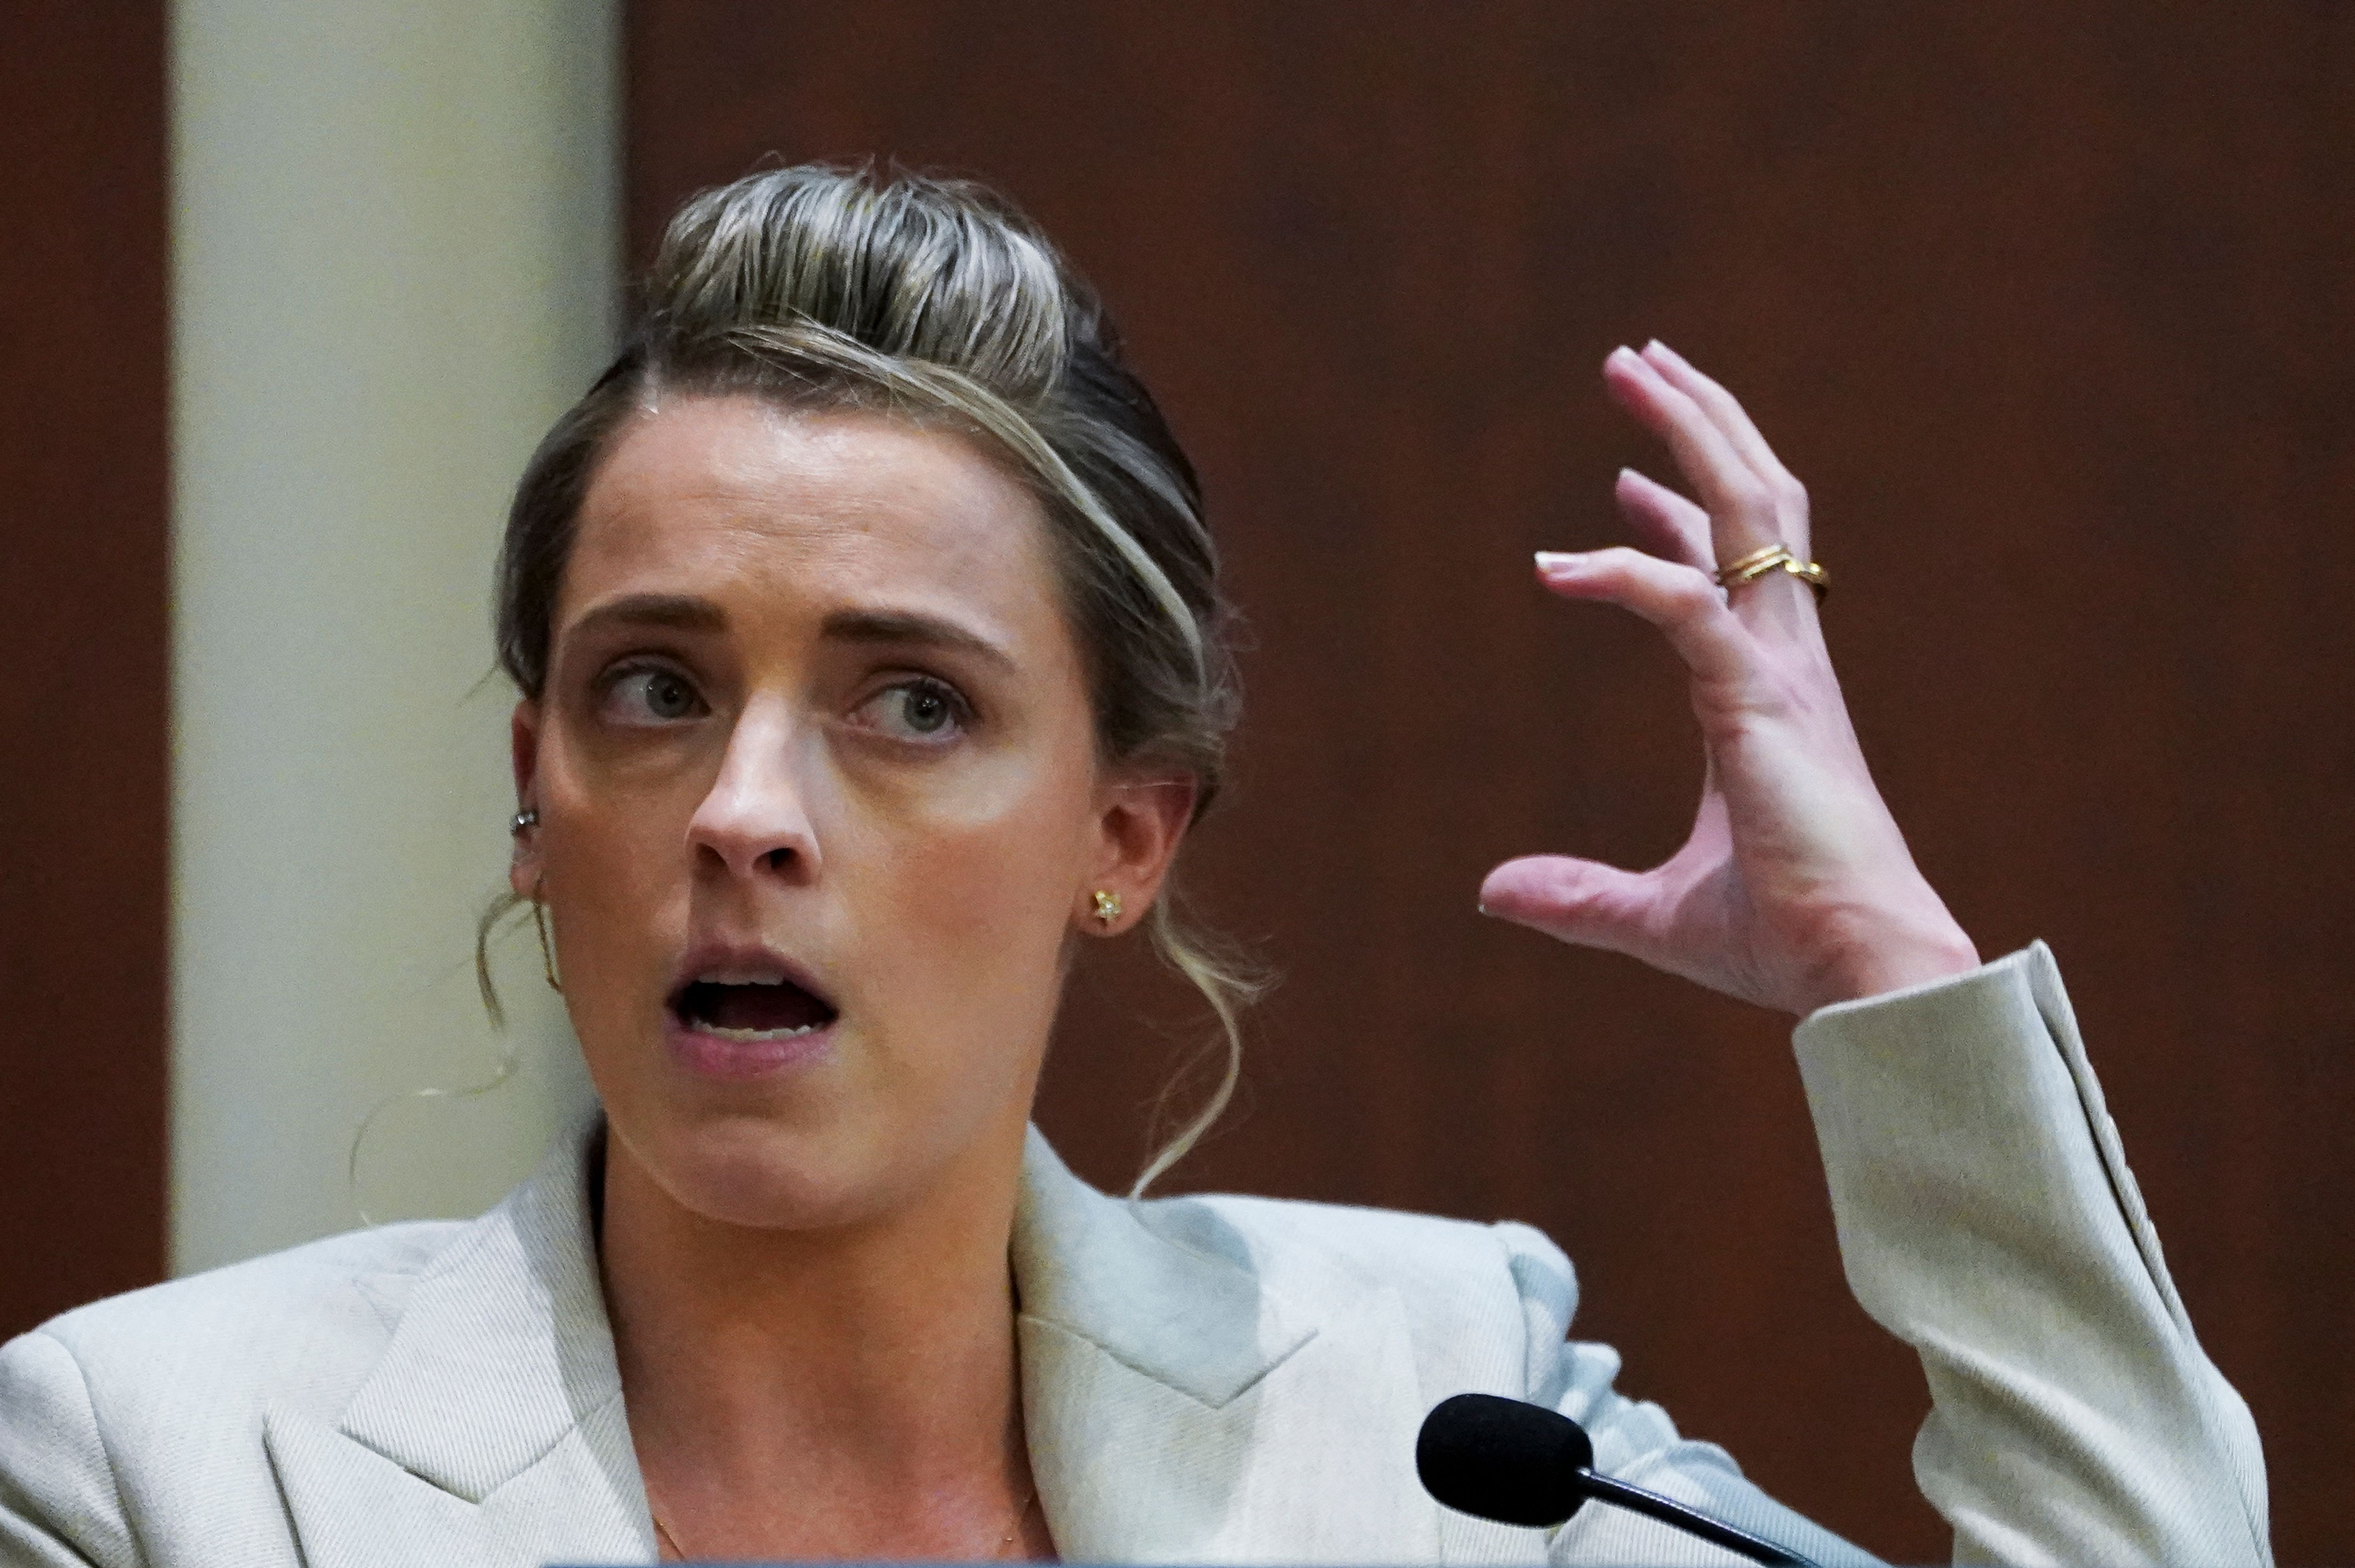 Amber Heard's sister, Whitney Henriquez, testifies on the stand during Johnny Depp's defamation trial against ex-wife Amber Heard at the Fairfax County Circuit Courthouse on May 18, 2022 in Fairfax. / Source: Getty Images